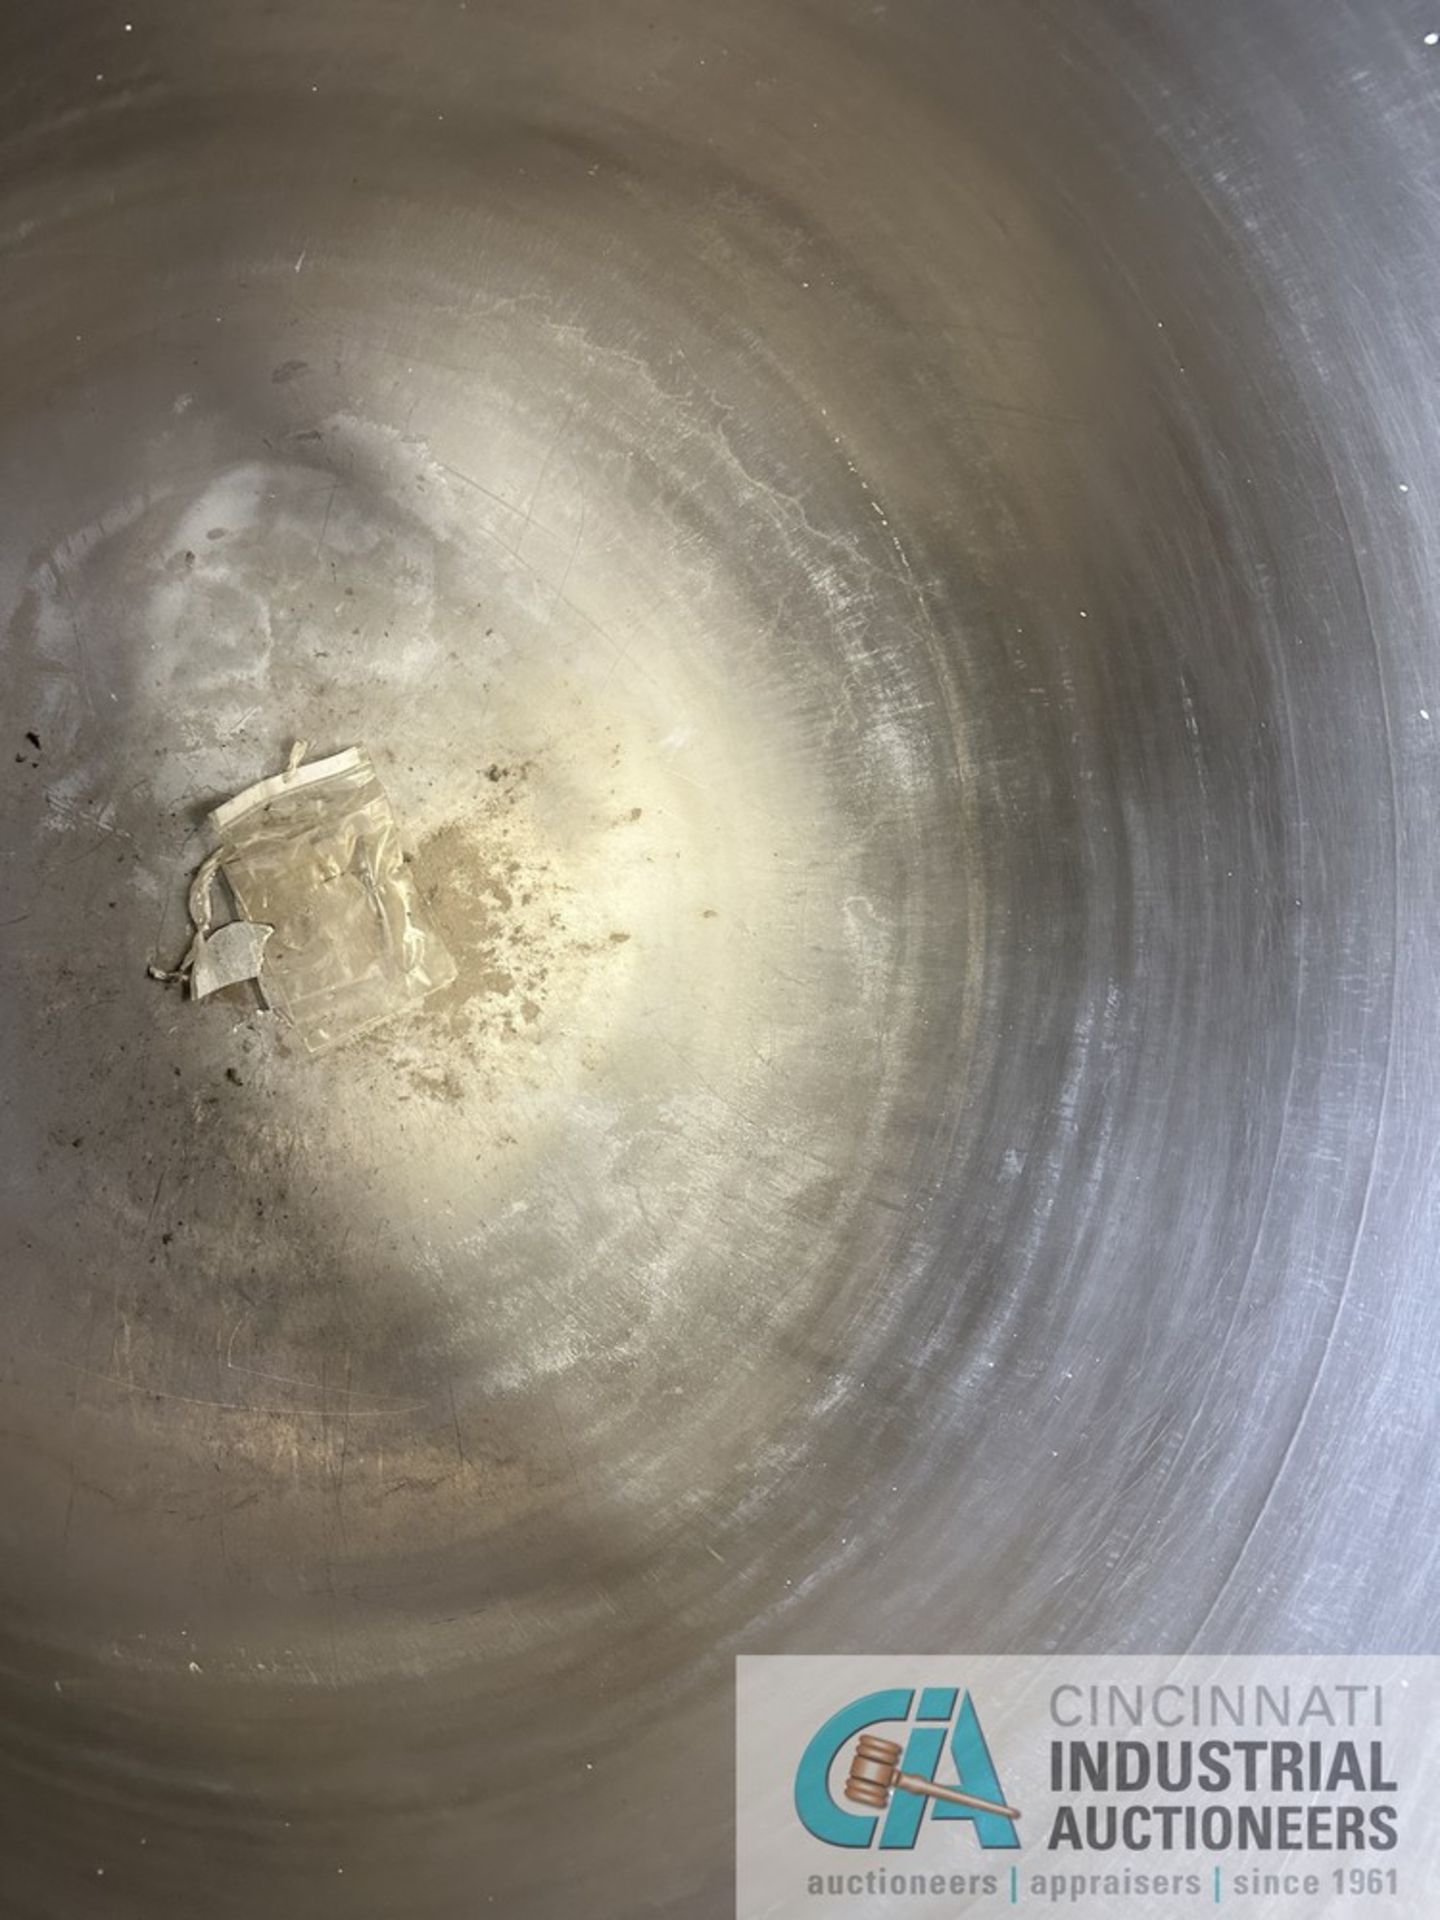 245 GALLON STAINLESS STEEL PORTABLE MIXING BOWL - Image 3 of 3